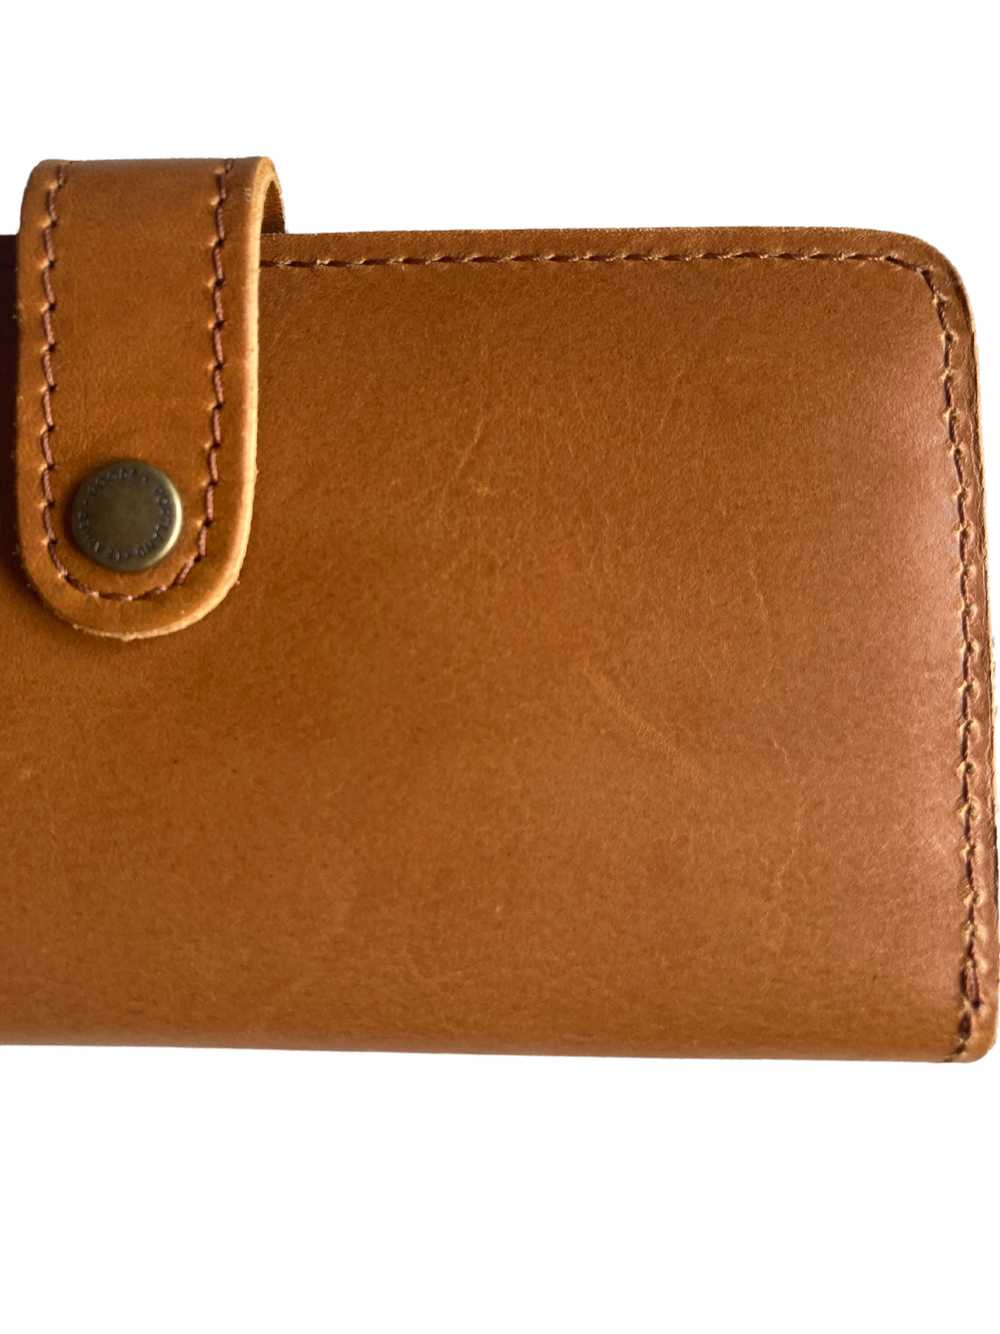 Portland Leather 'Almost Perfect' Women's Bifold … - image 2